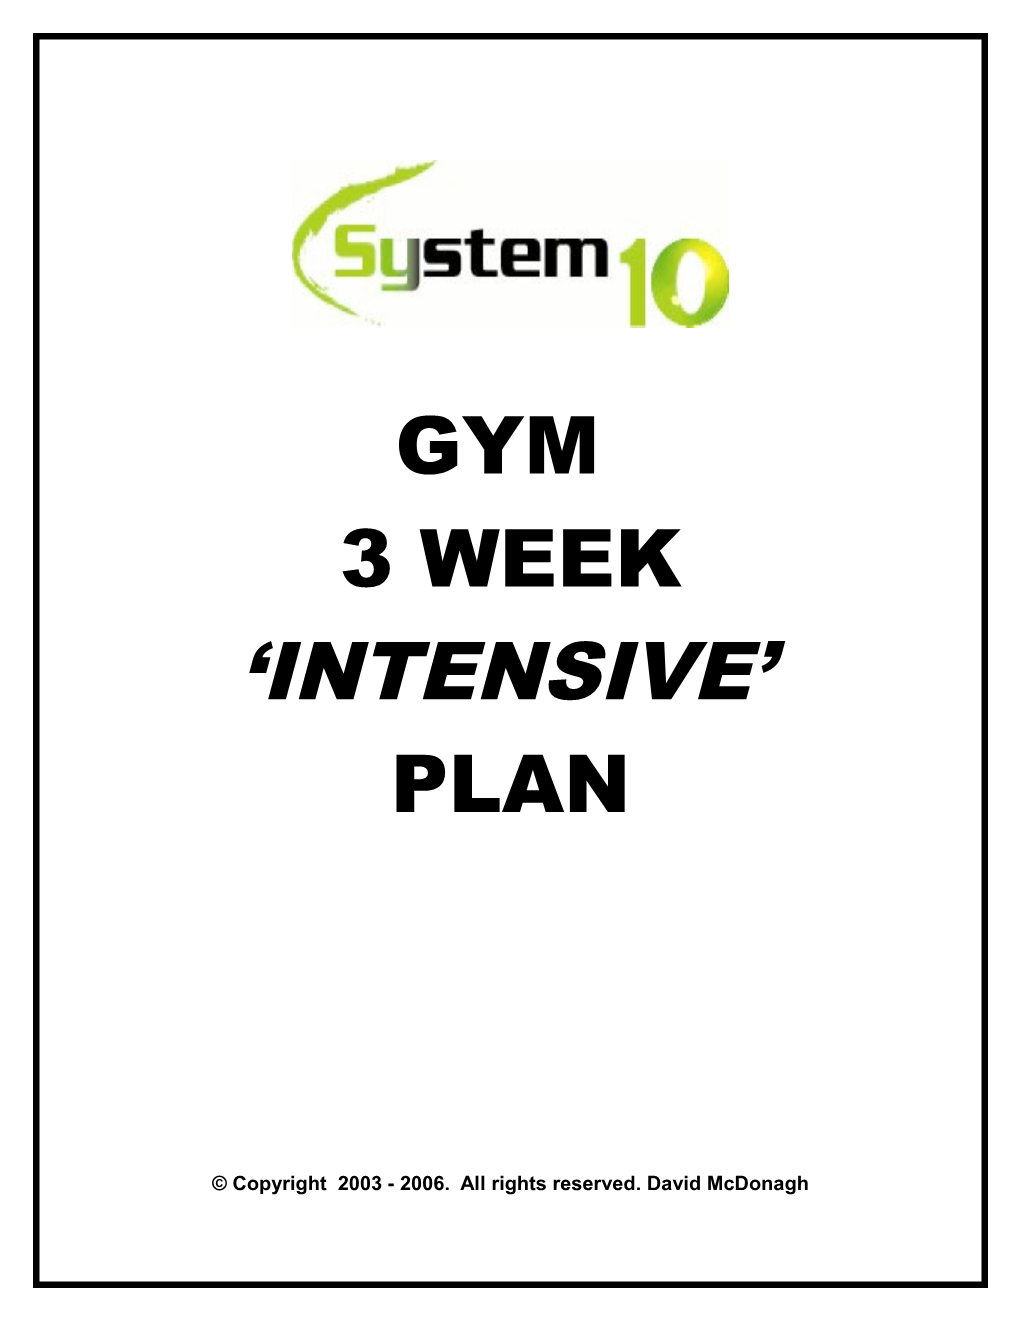 Welcome to Our System 10 Gym Plan. This Is Our3 Weekintensive Programme